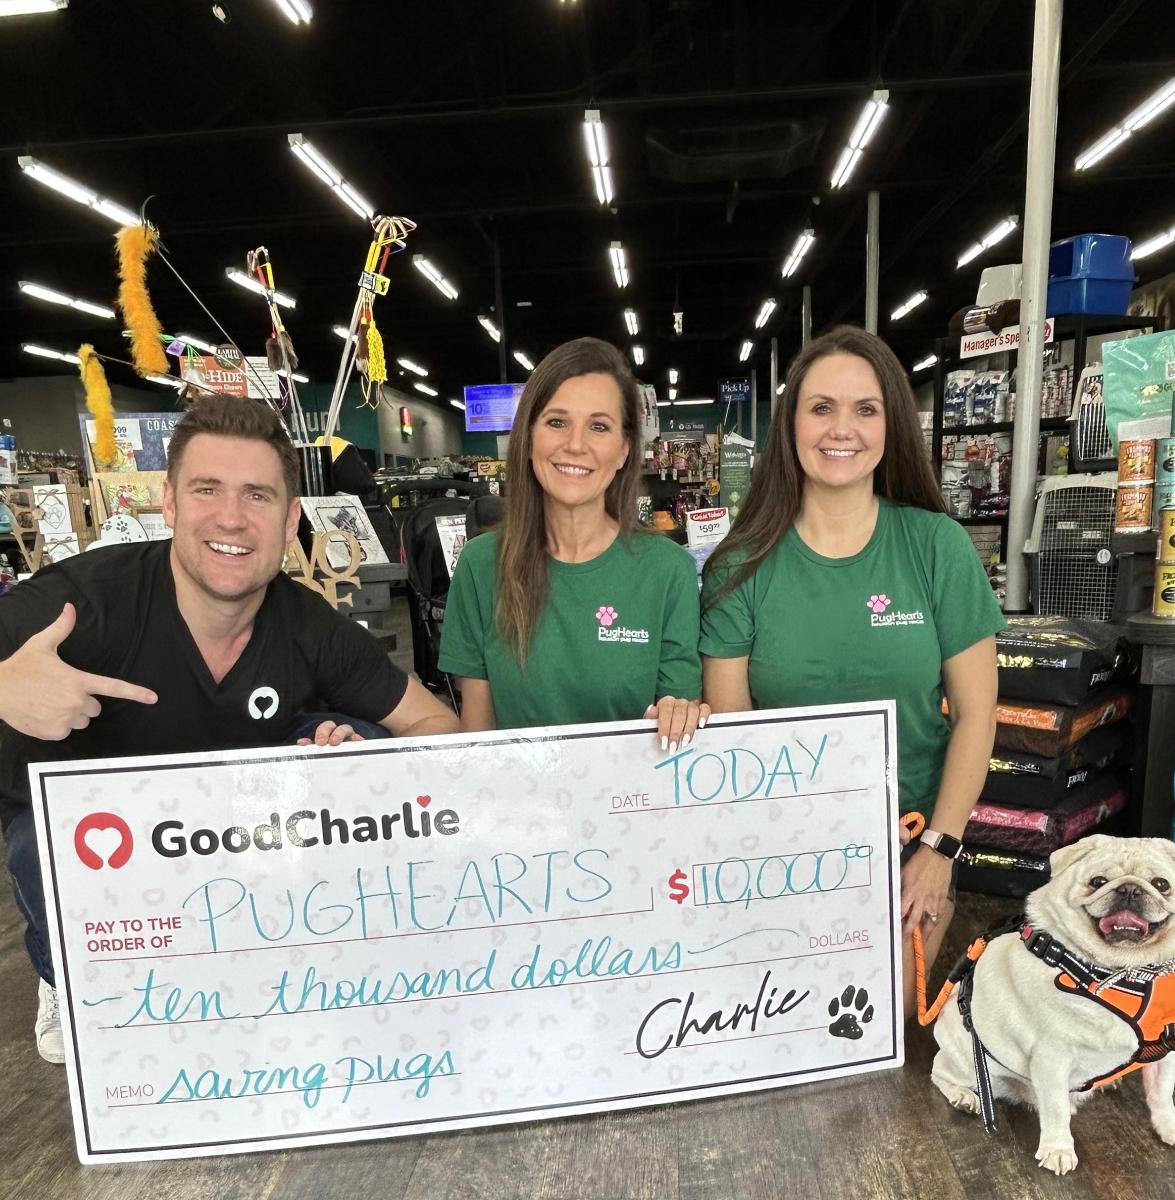 Daryl, cofounder of GoodCharlie, with two Pughearts representatives holding a cheque of $10,000 presented to Pughearts.